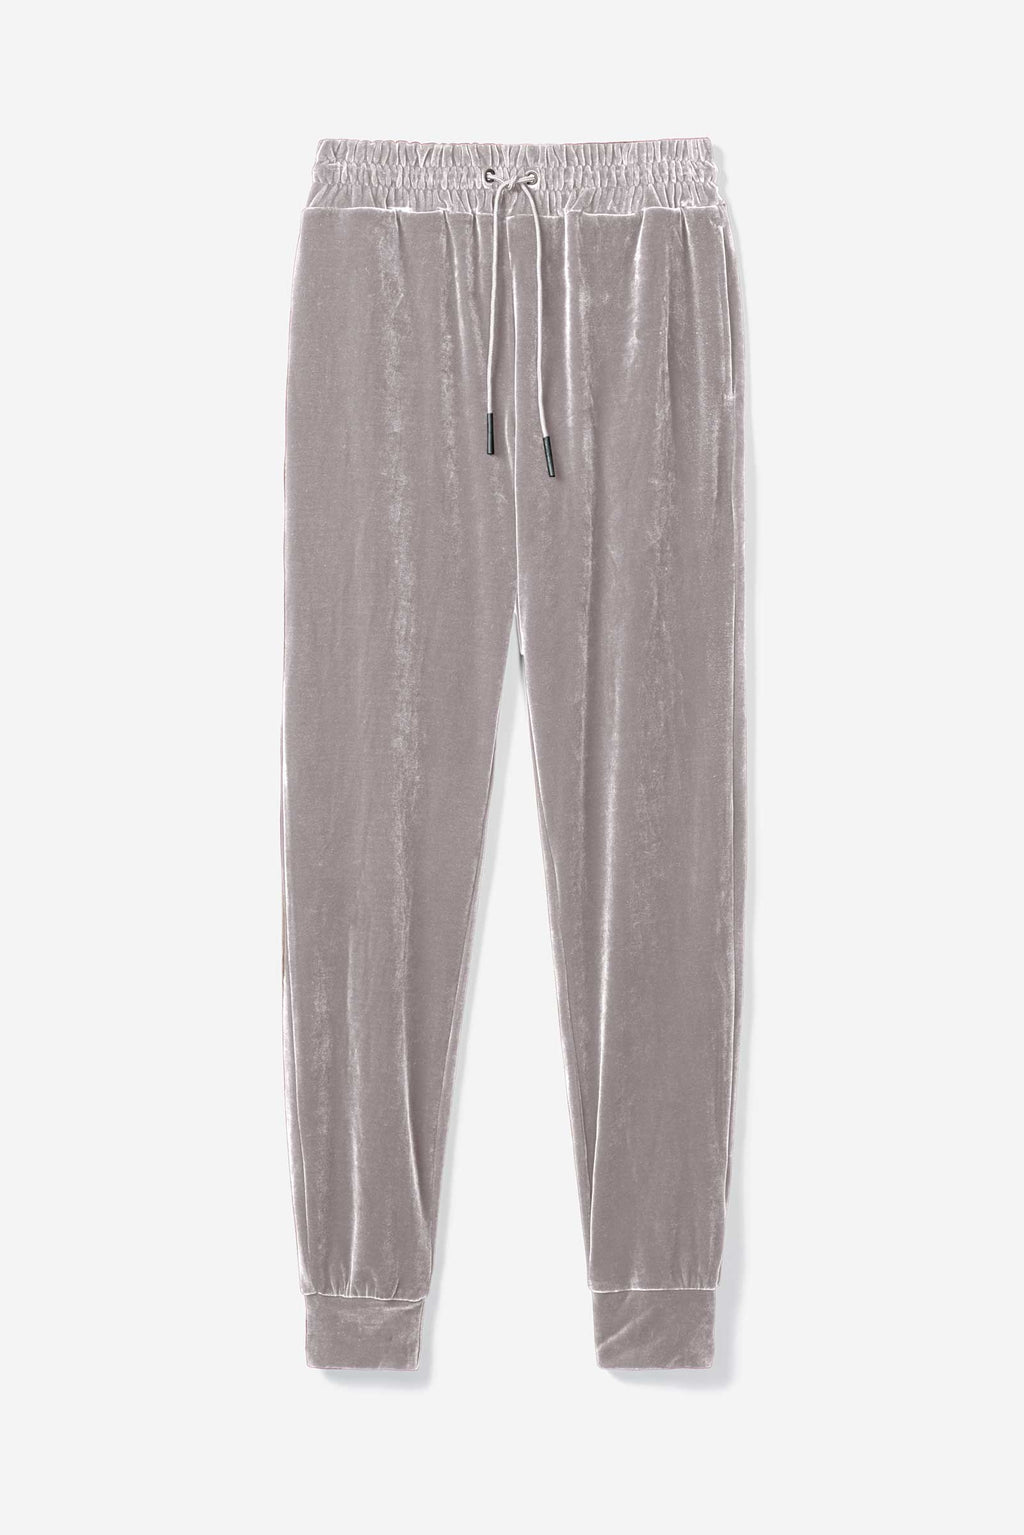  Cute Sweatpants, Jogger Cropped Trousers, Thick-Velvet